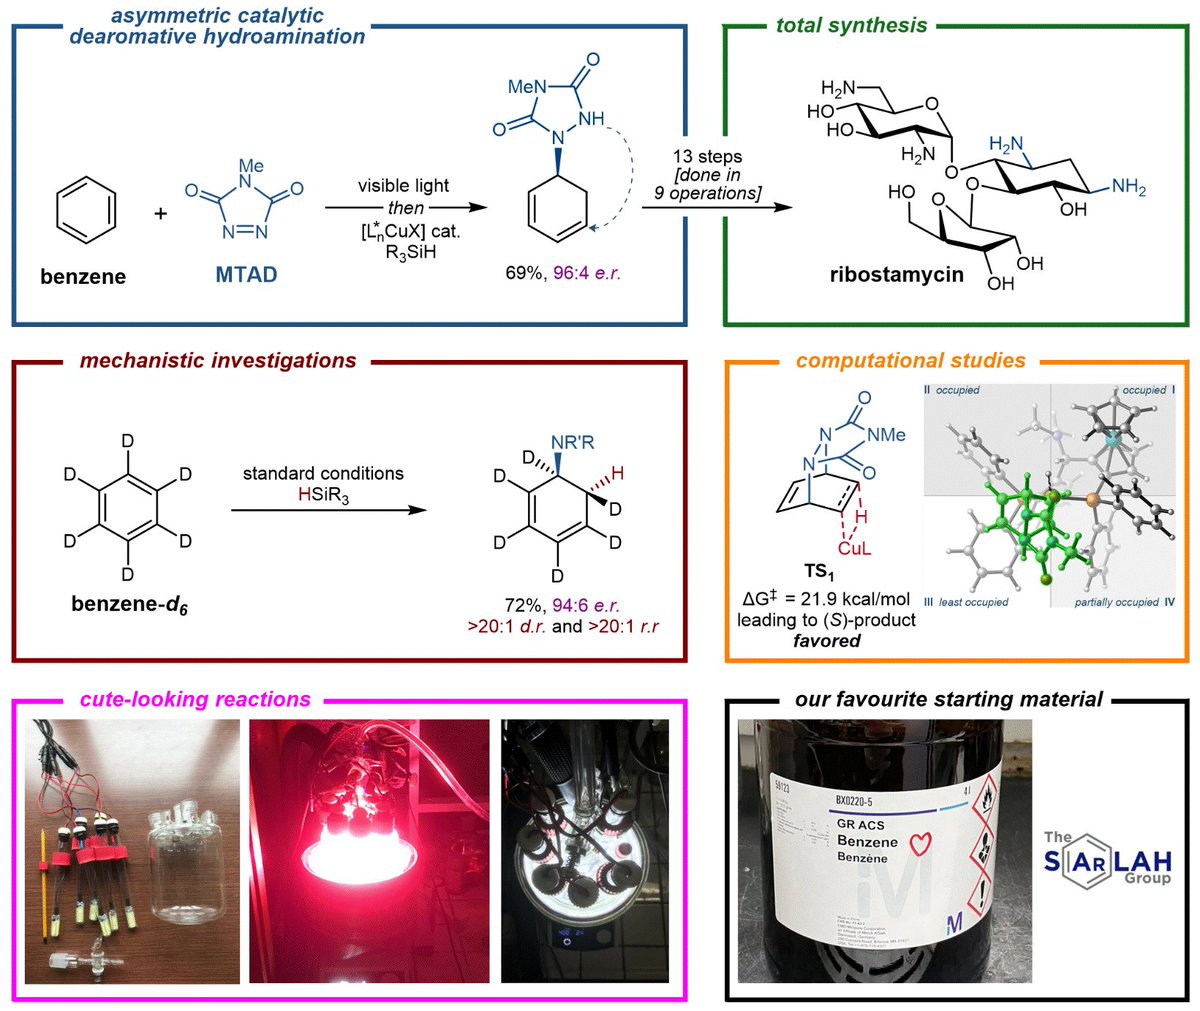 Happy to report a practical bottom-up synthesis of aminoglycoside antibiotic ribostamycin!!! Collaborative efforts with @pengliu_group. Novel asymmetric catalytic desymmetrization of ⌬ (♡!), mechanism, com. studies, and more! nature.com/articles/s4416…